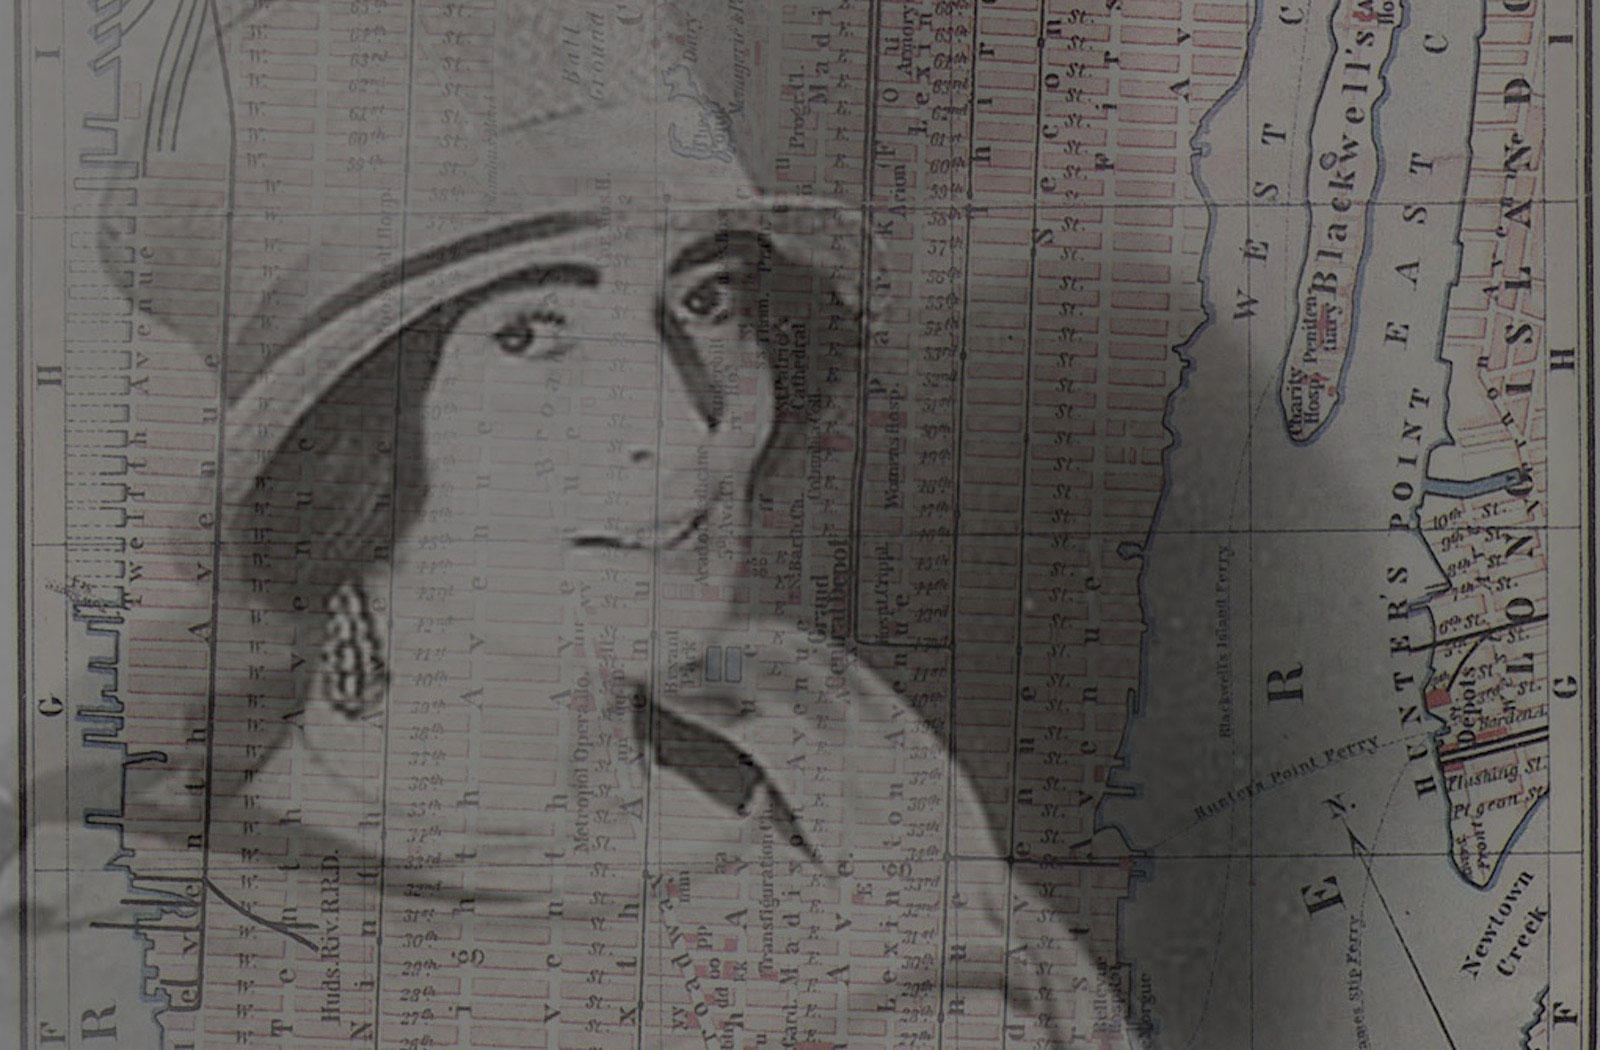 Mina Loy with overlaid parallax map of New York City